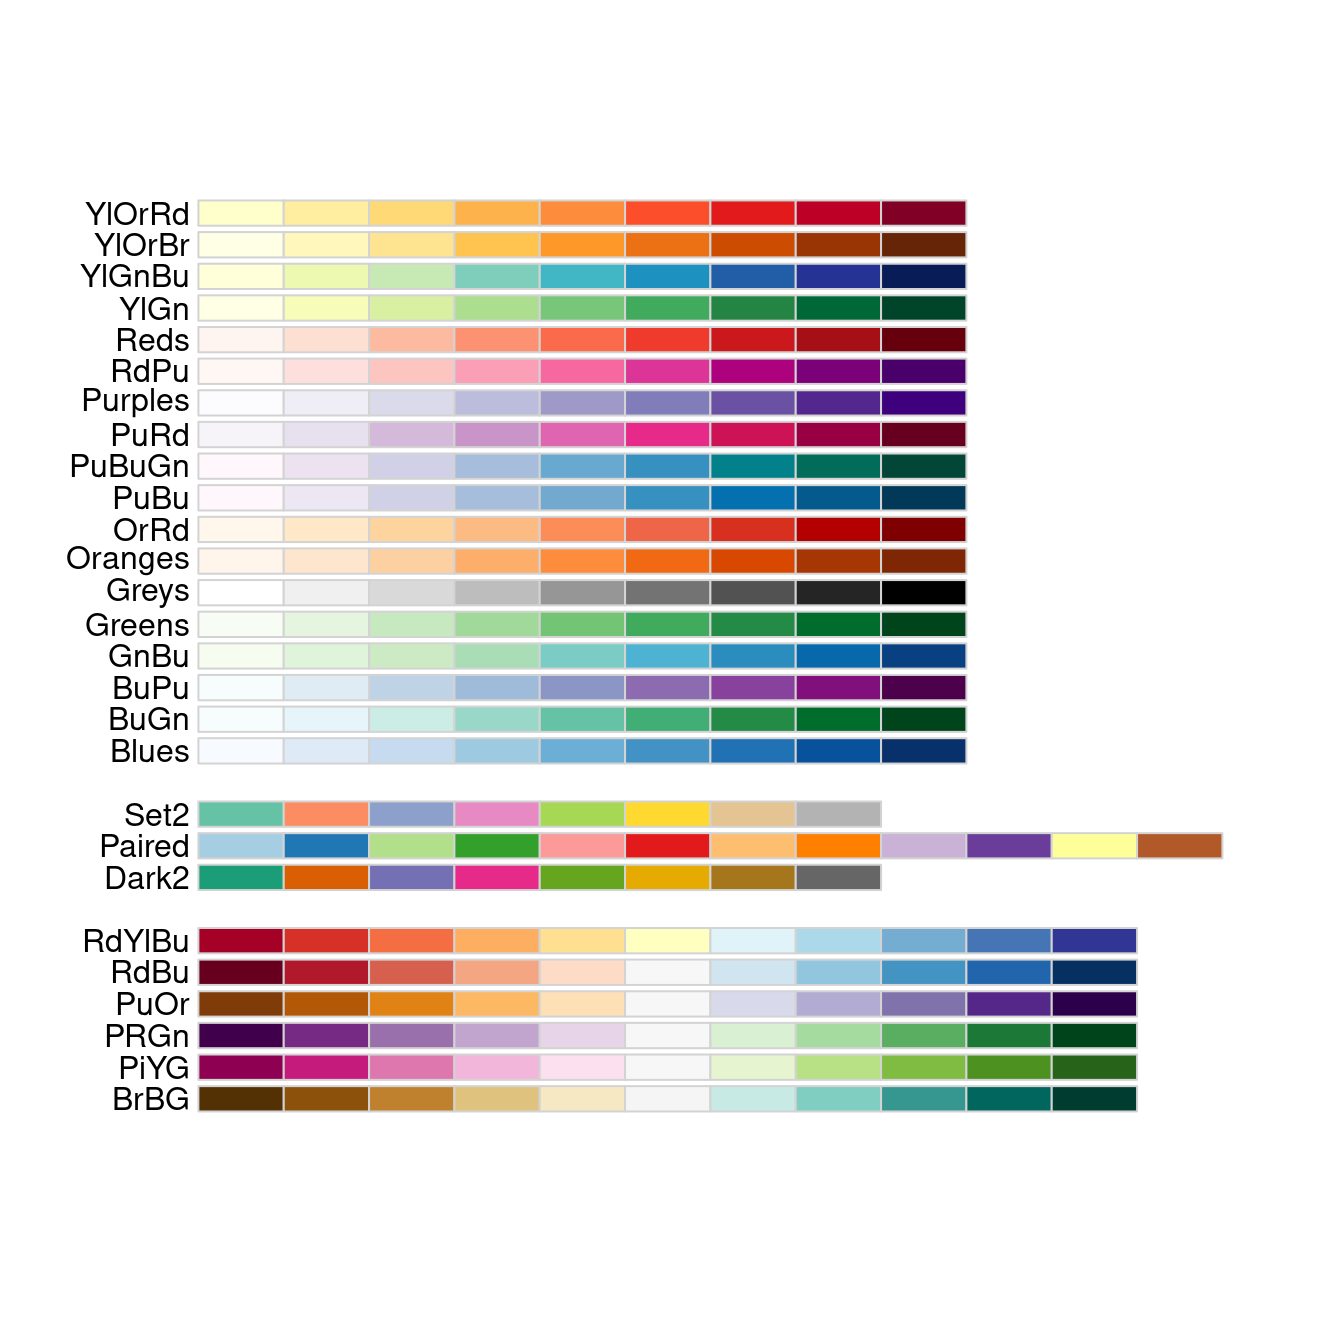 Color palettes available from the RColorBrewer R package.